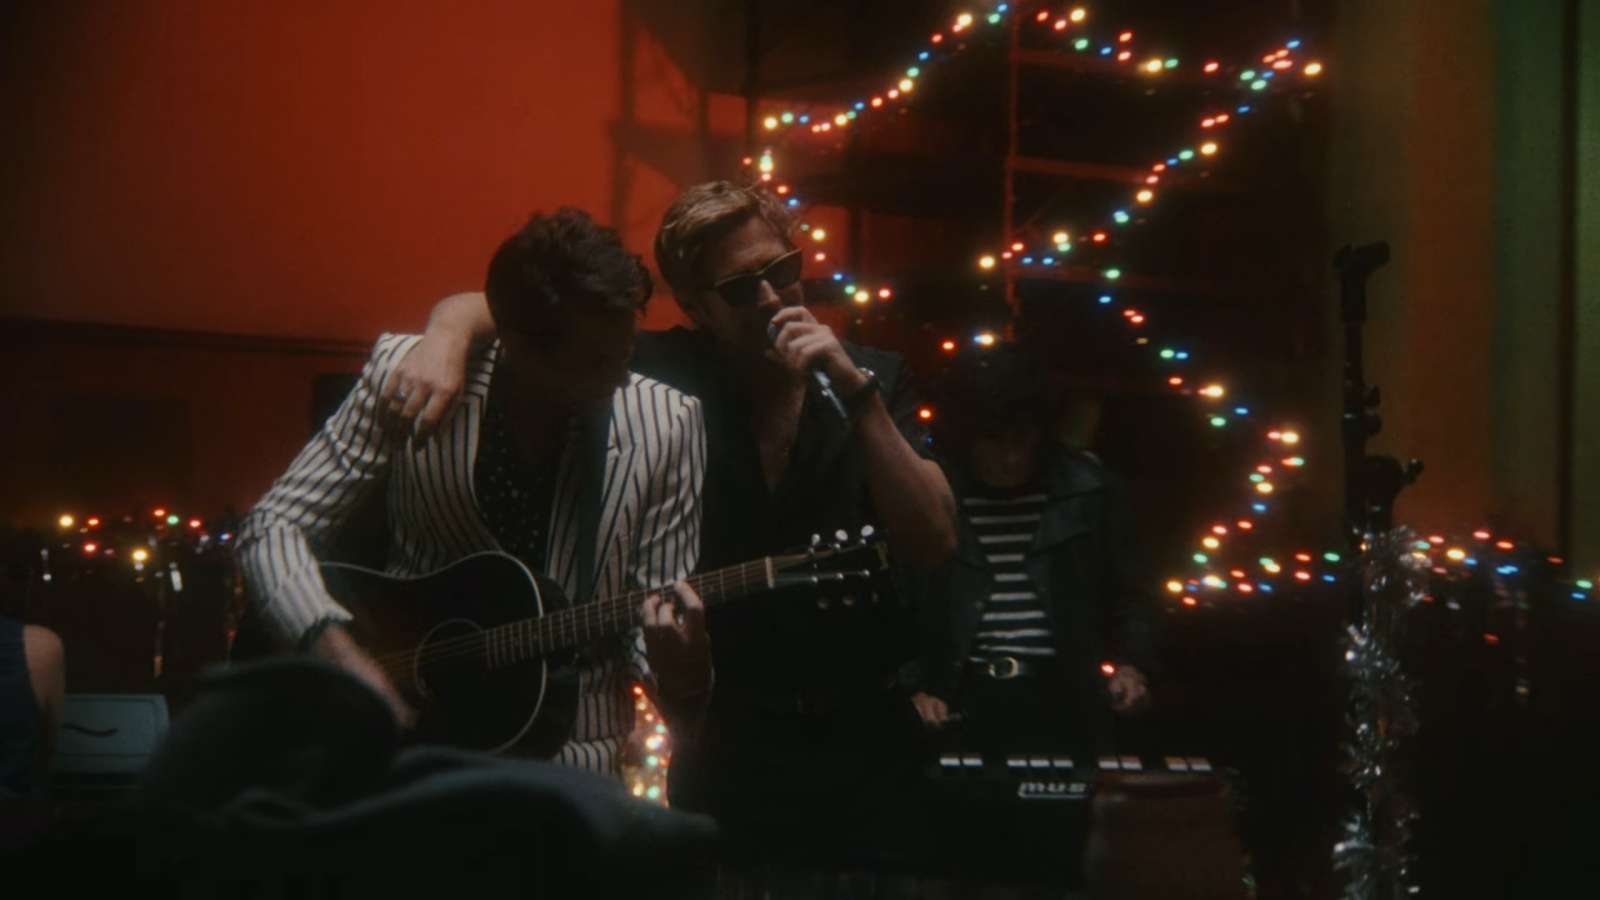 Ryan Gosling and Mark Ronson performing in a new Christmas video